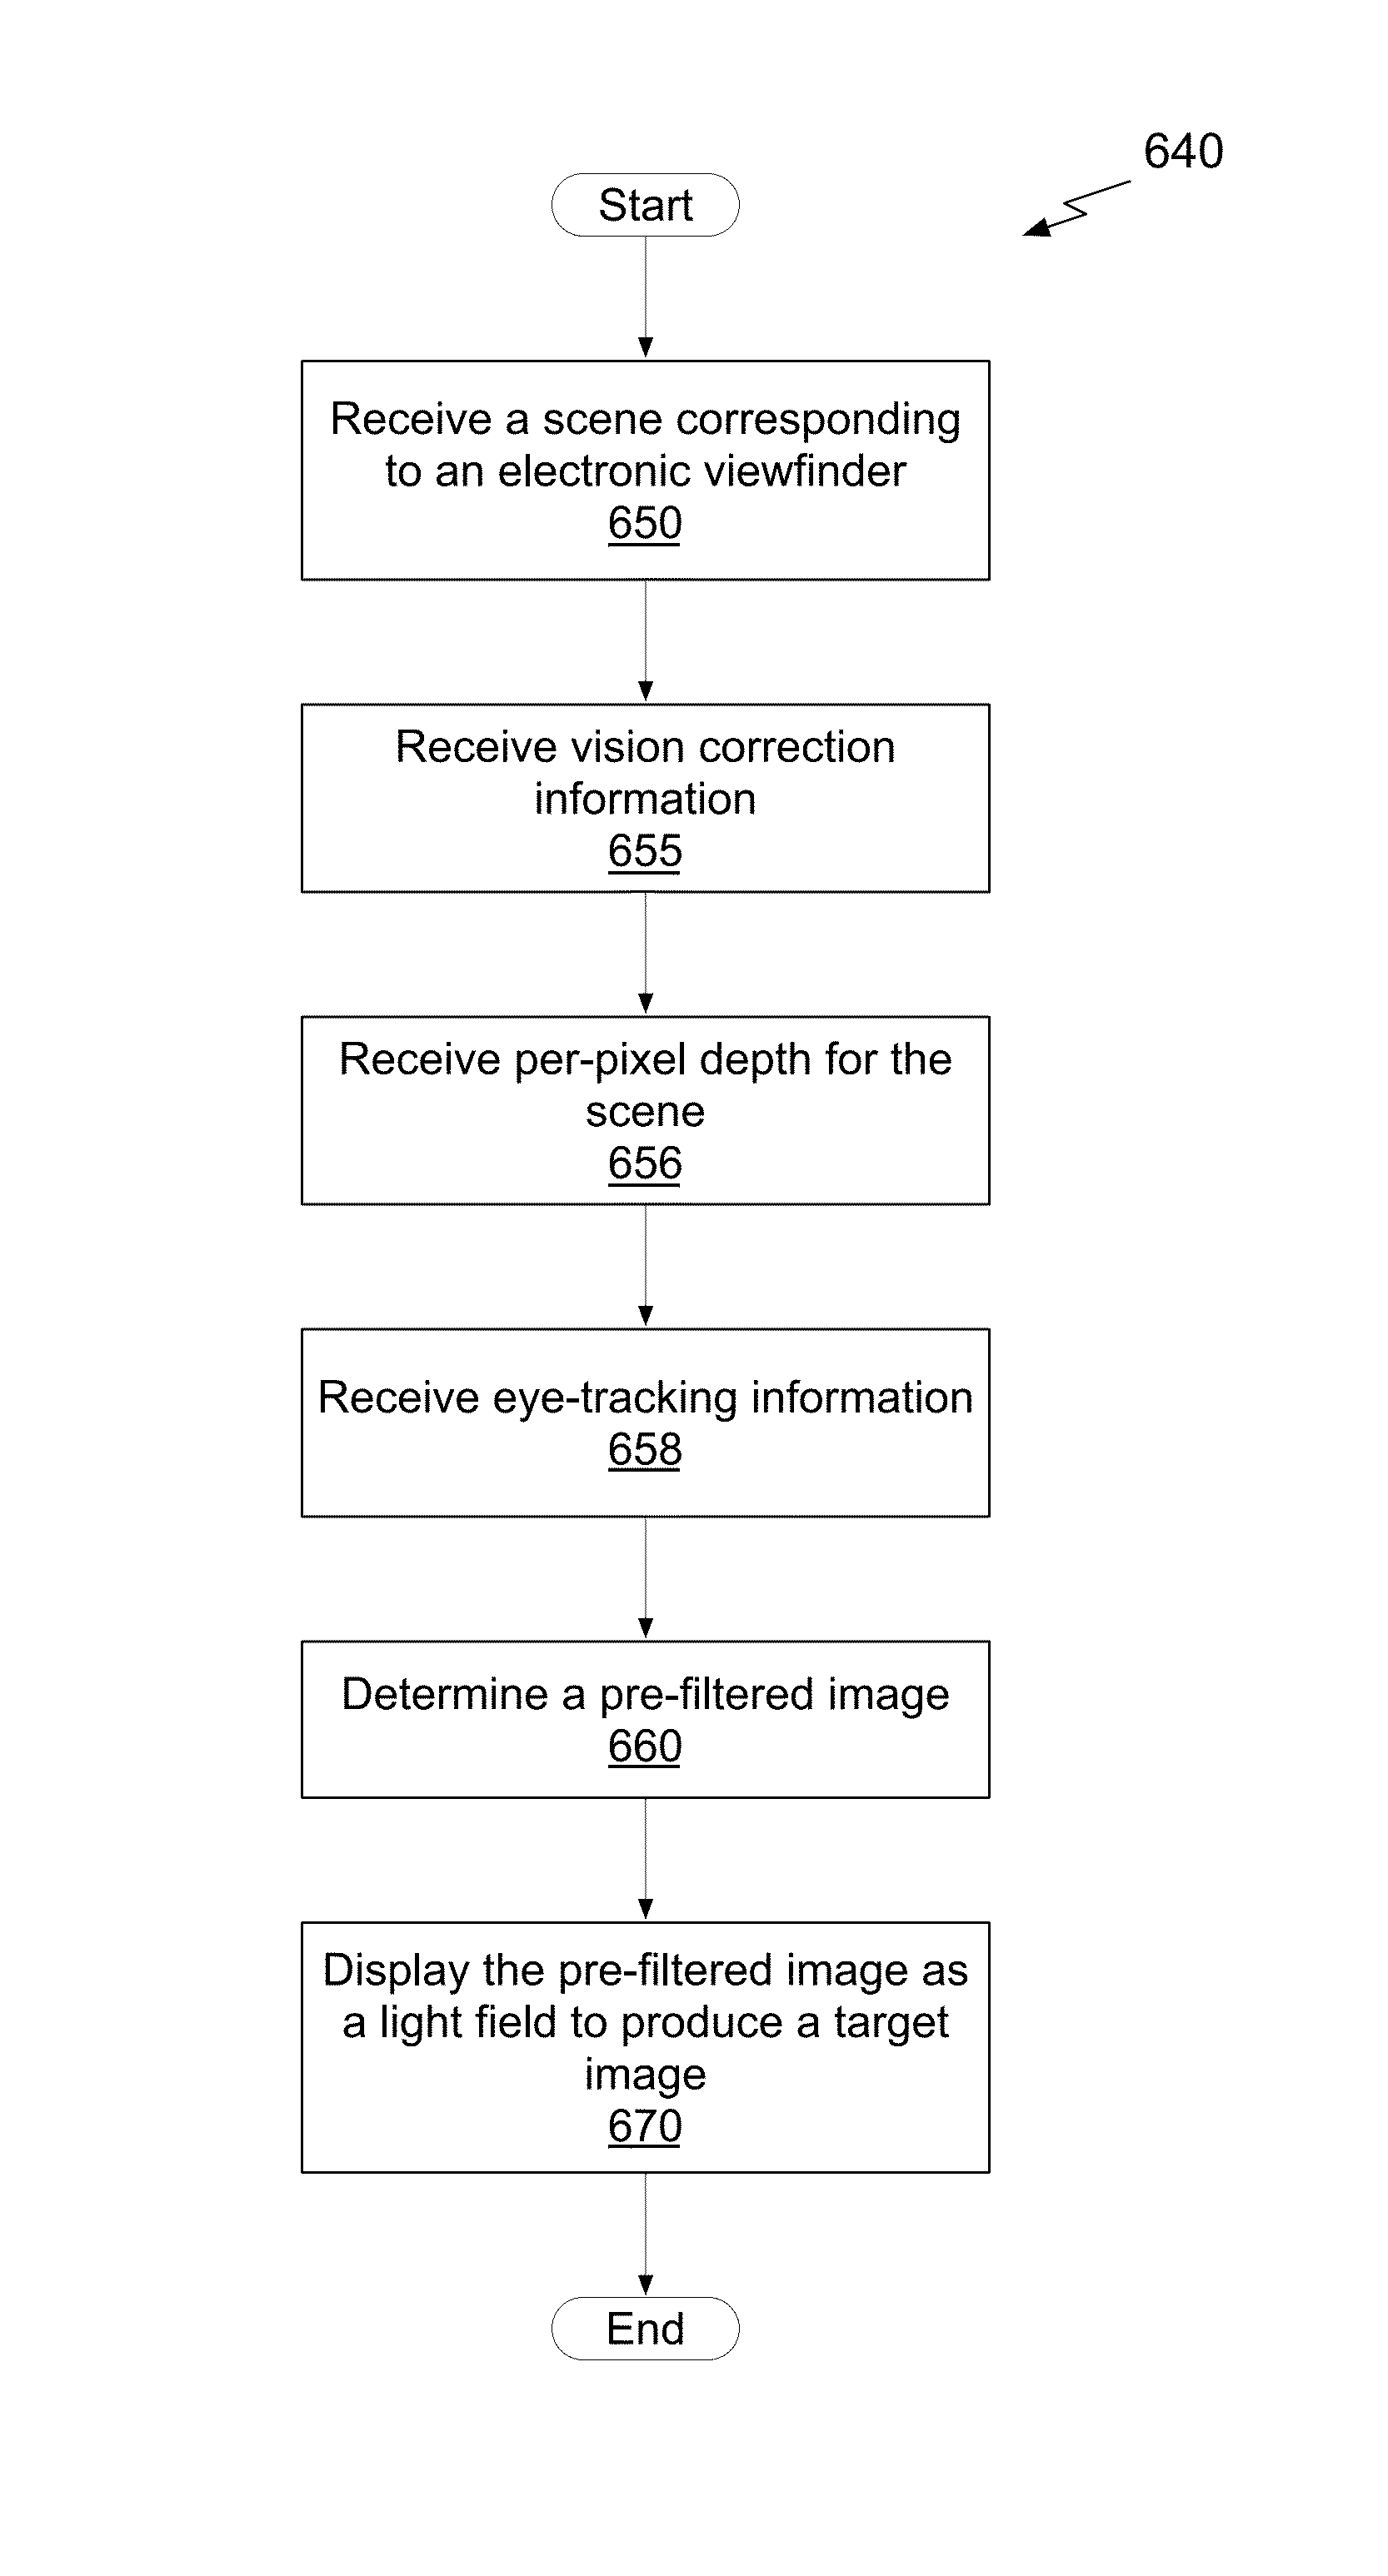 System, method, and computer program product for displaying a scene as a light field